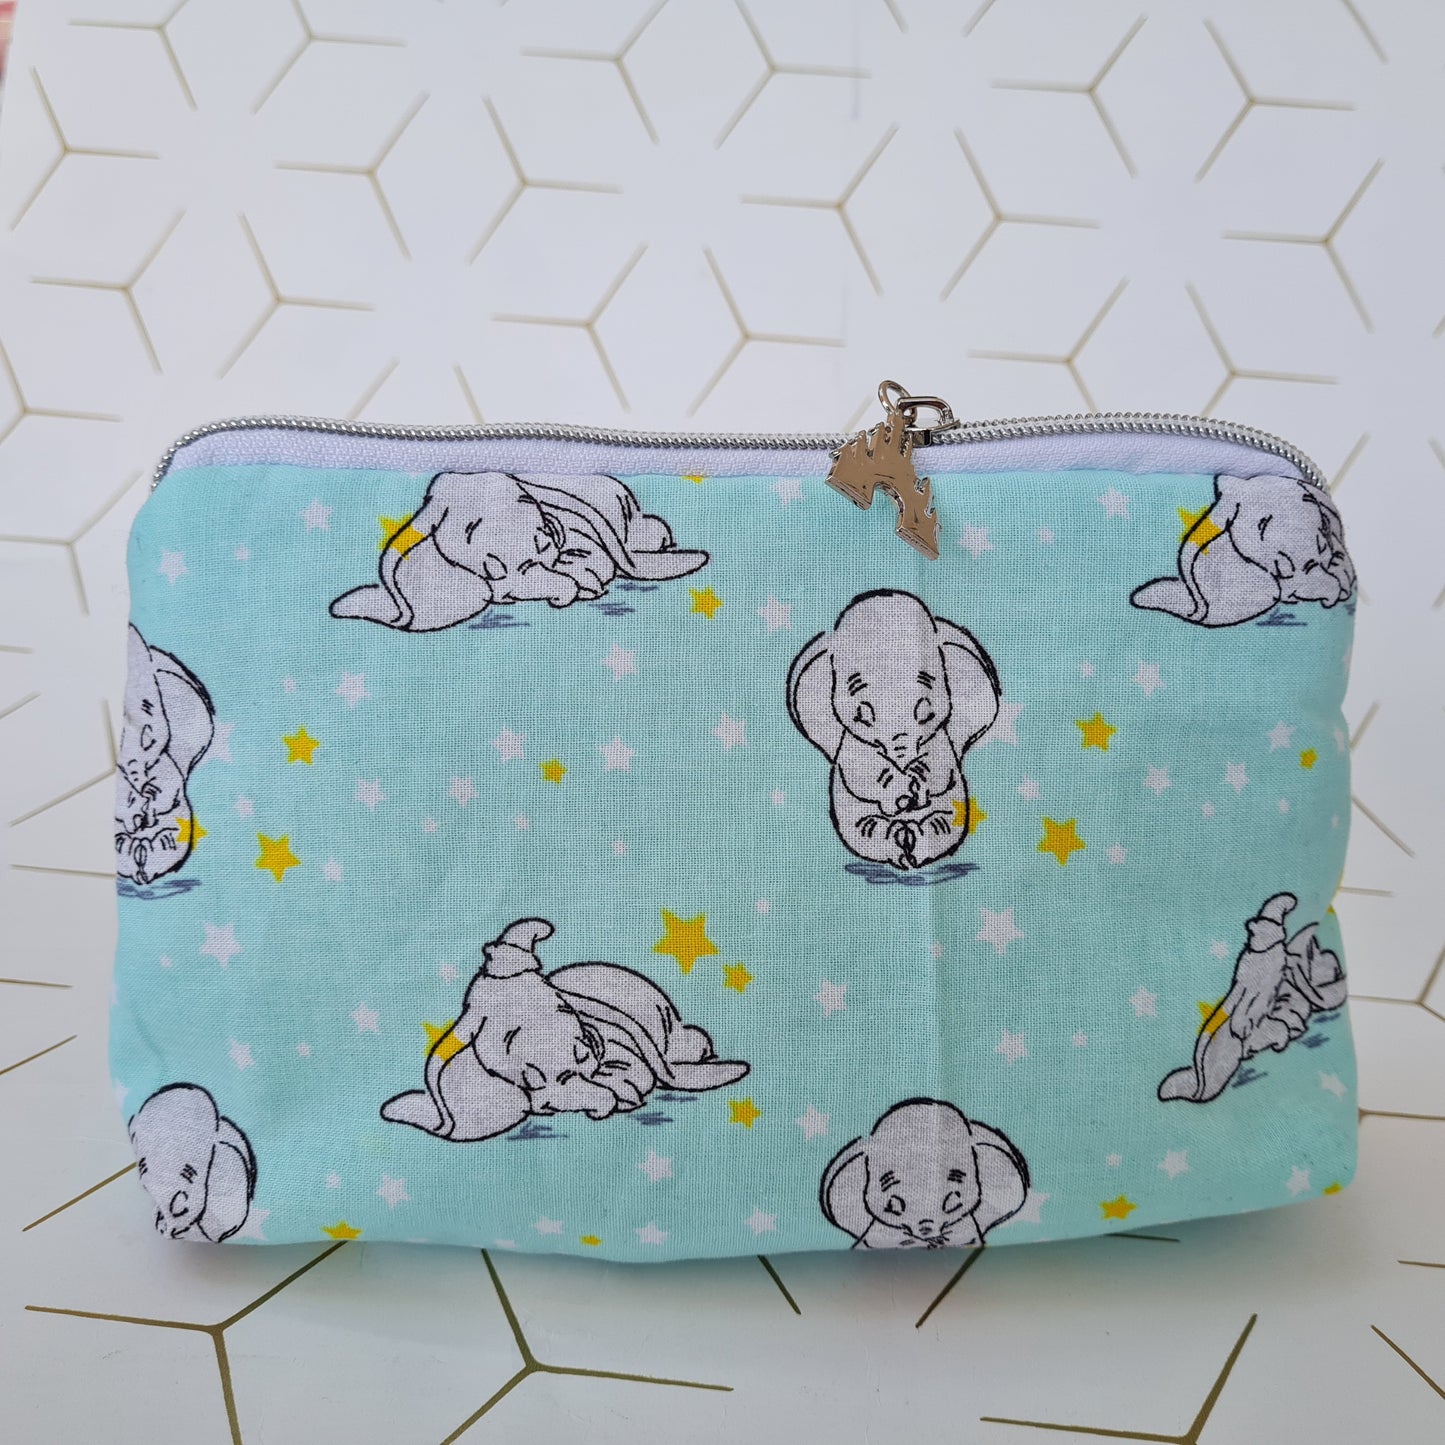 Baby Mine lined triangle cosmetic bag with zipper